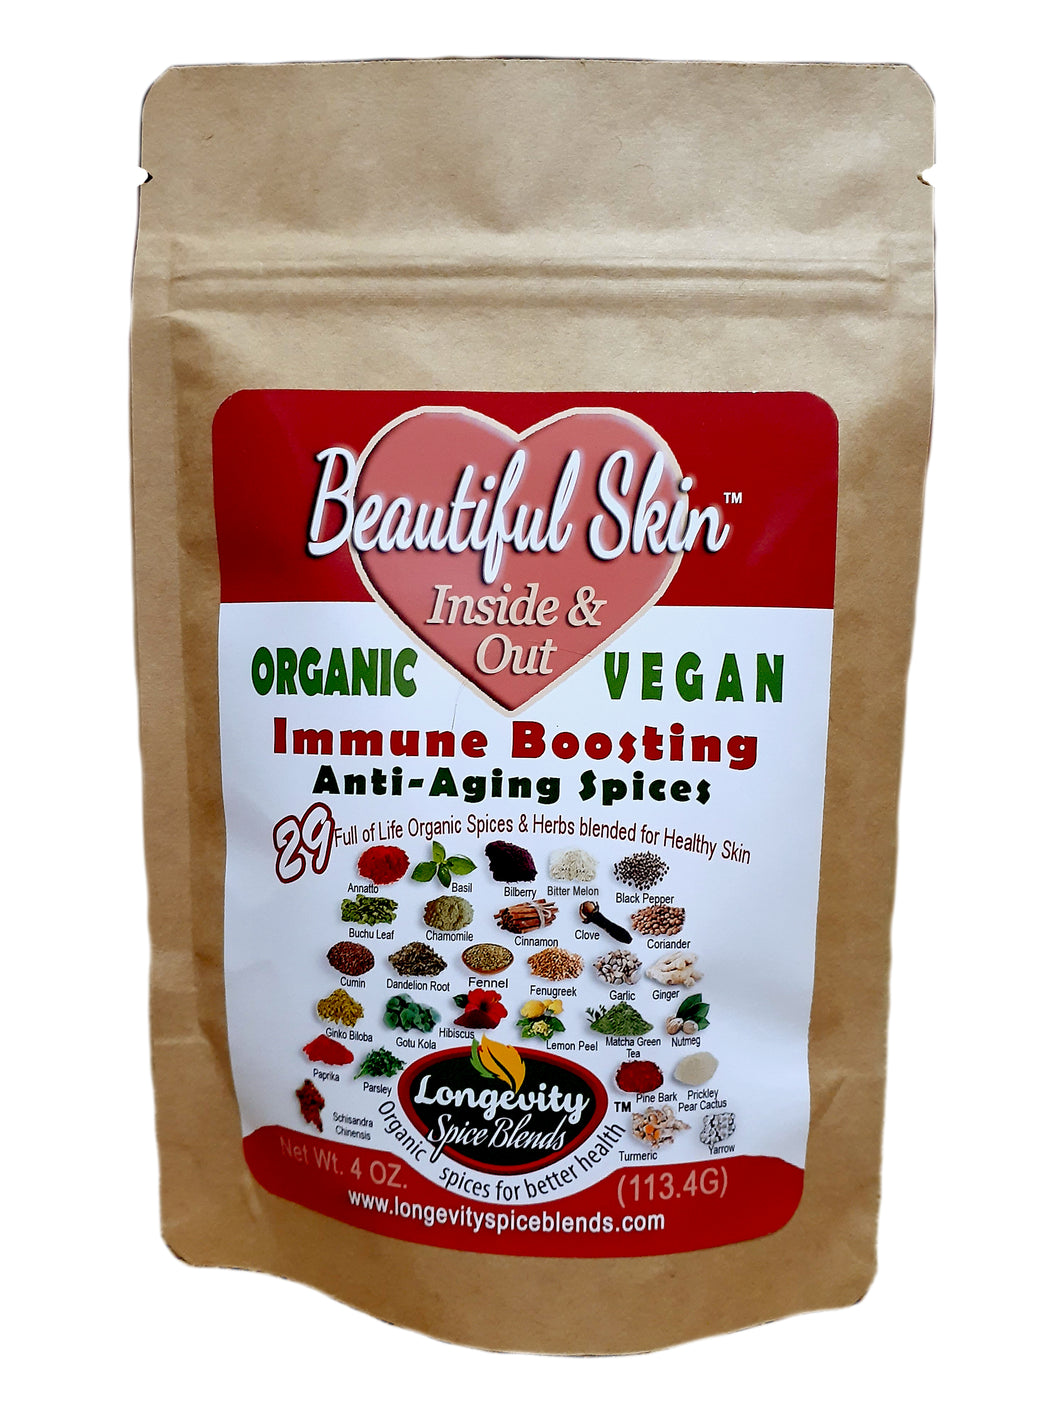 Skin - Beautiful Skin Spices - Natural Anti-Aging Skin Care Inside & Out - 29 Organic Spices for beautiful glowing skin (4 oz. pouch - 45 tsp. servings)